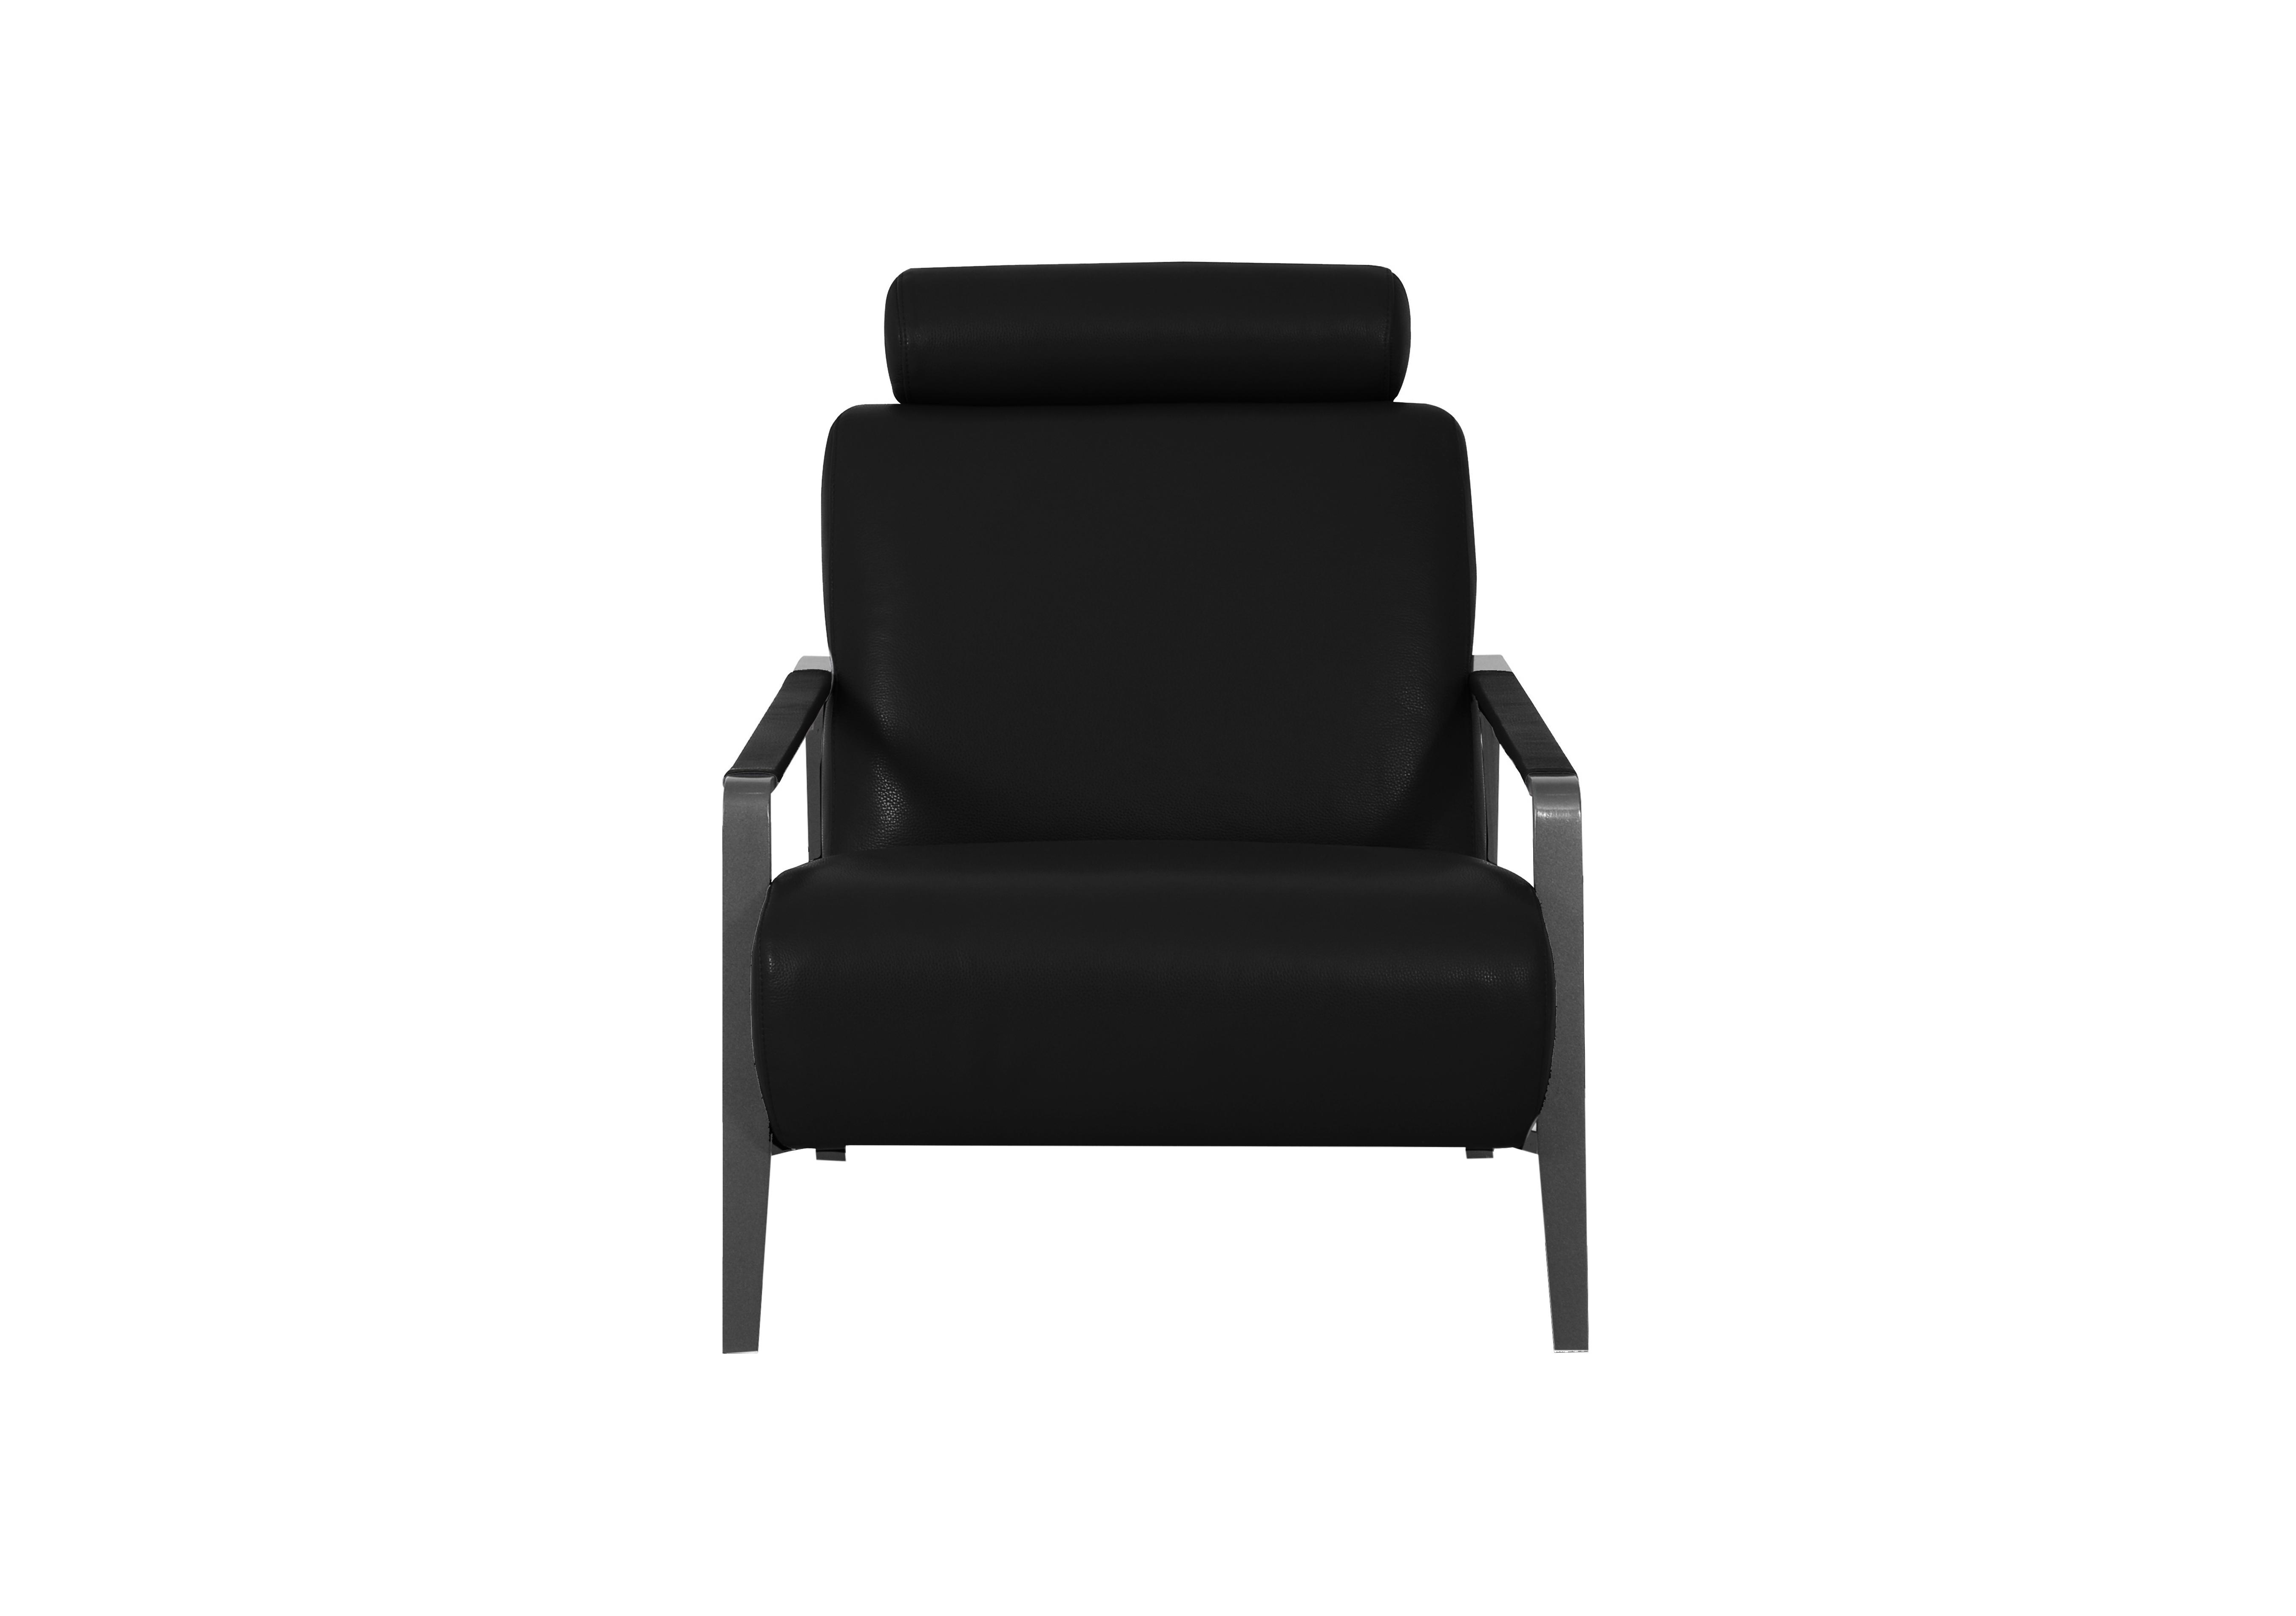 Lawson Leather Accent Chair in Nn-514e Black on Furniture Village